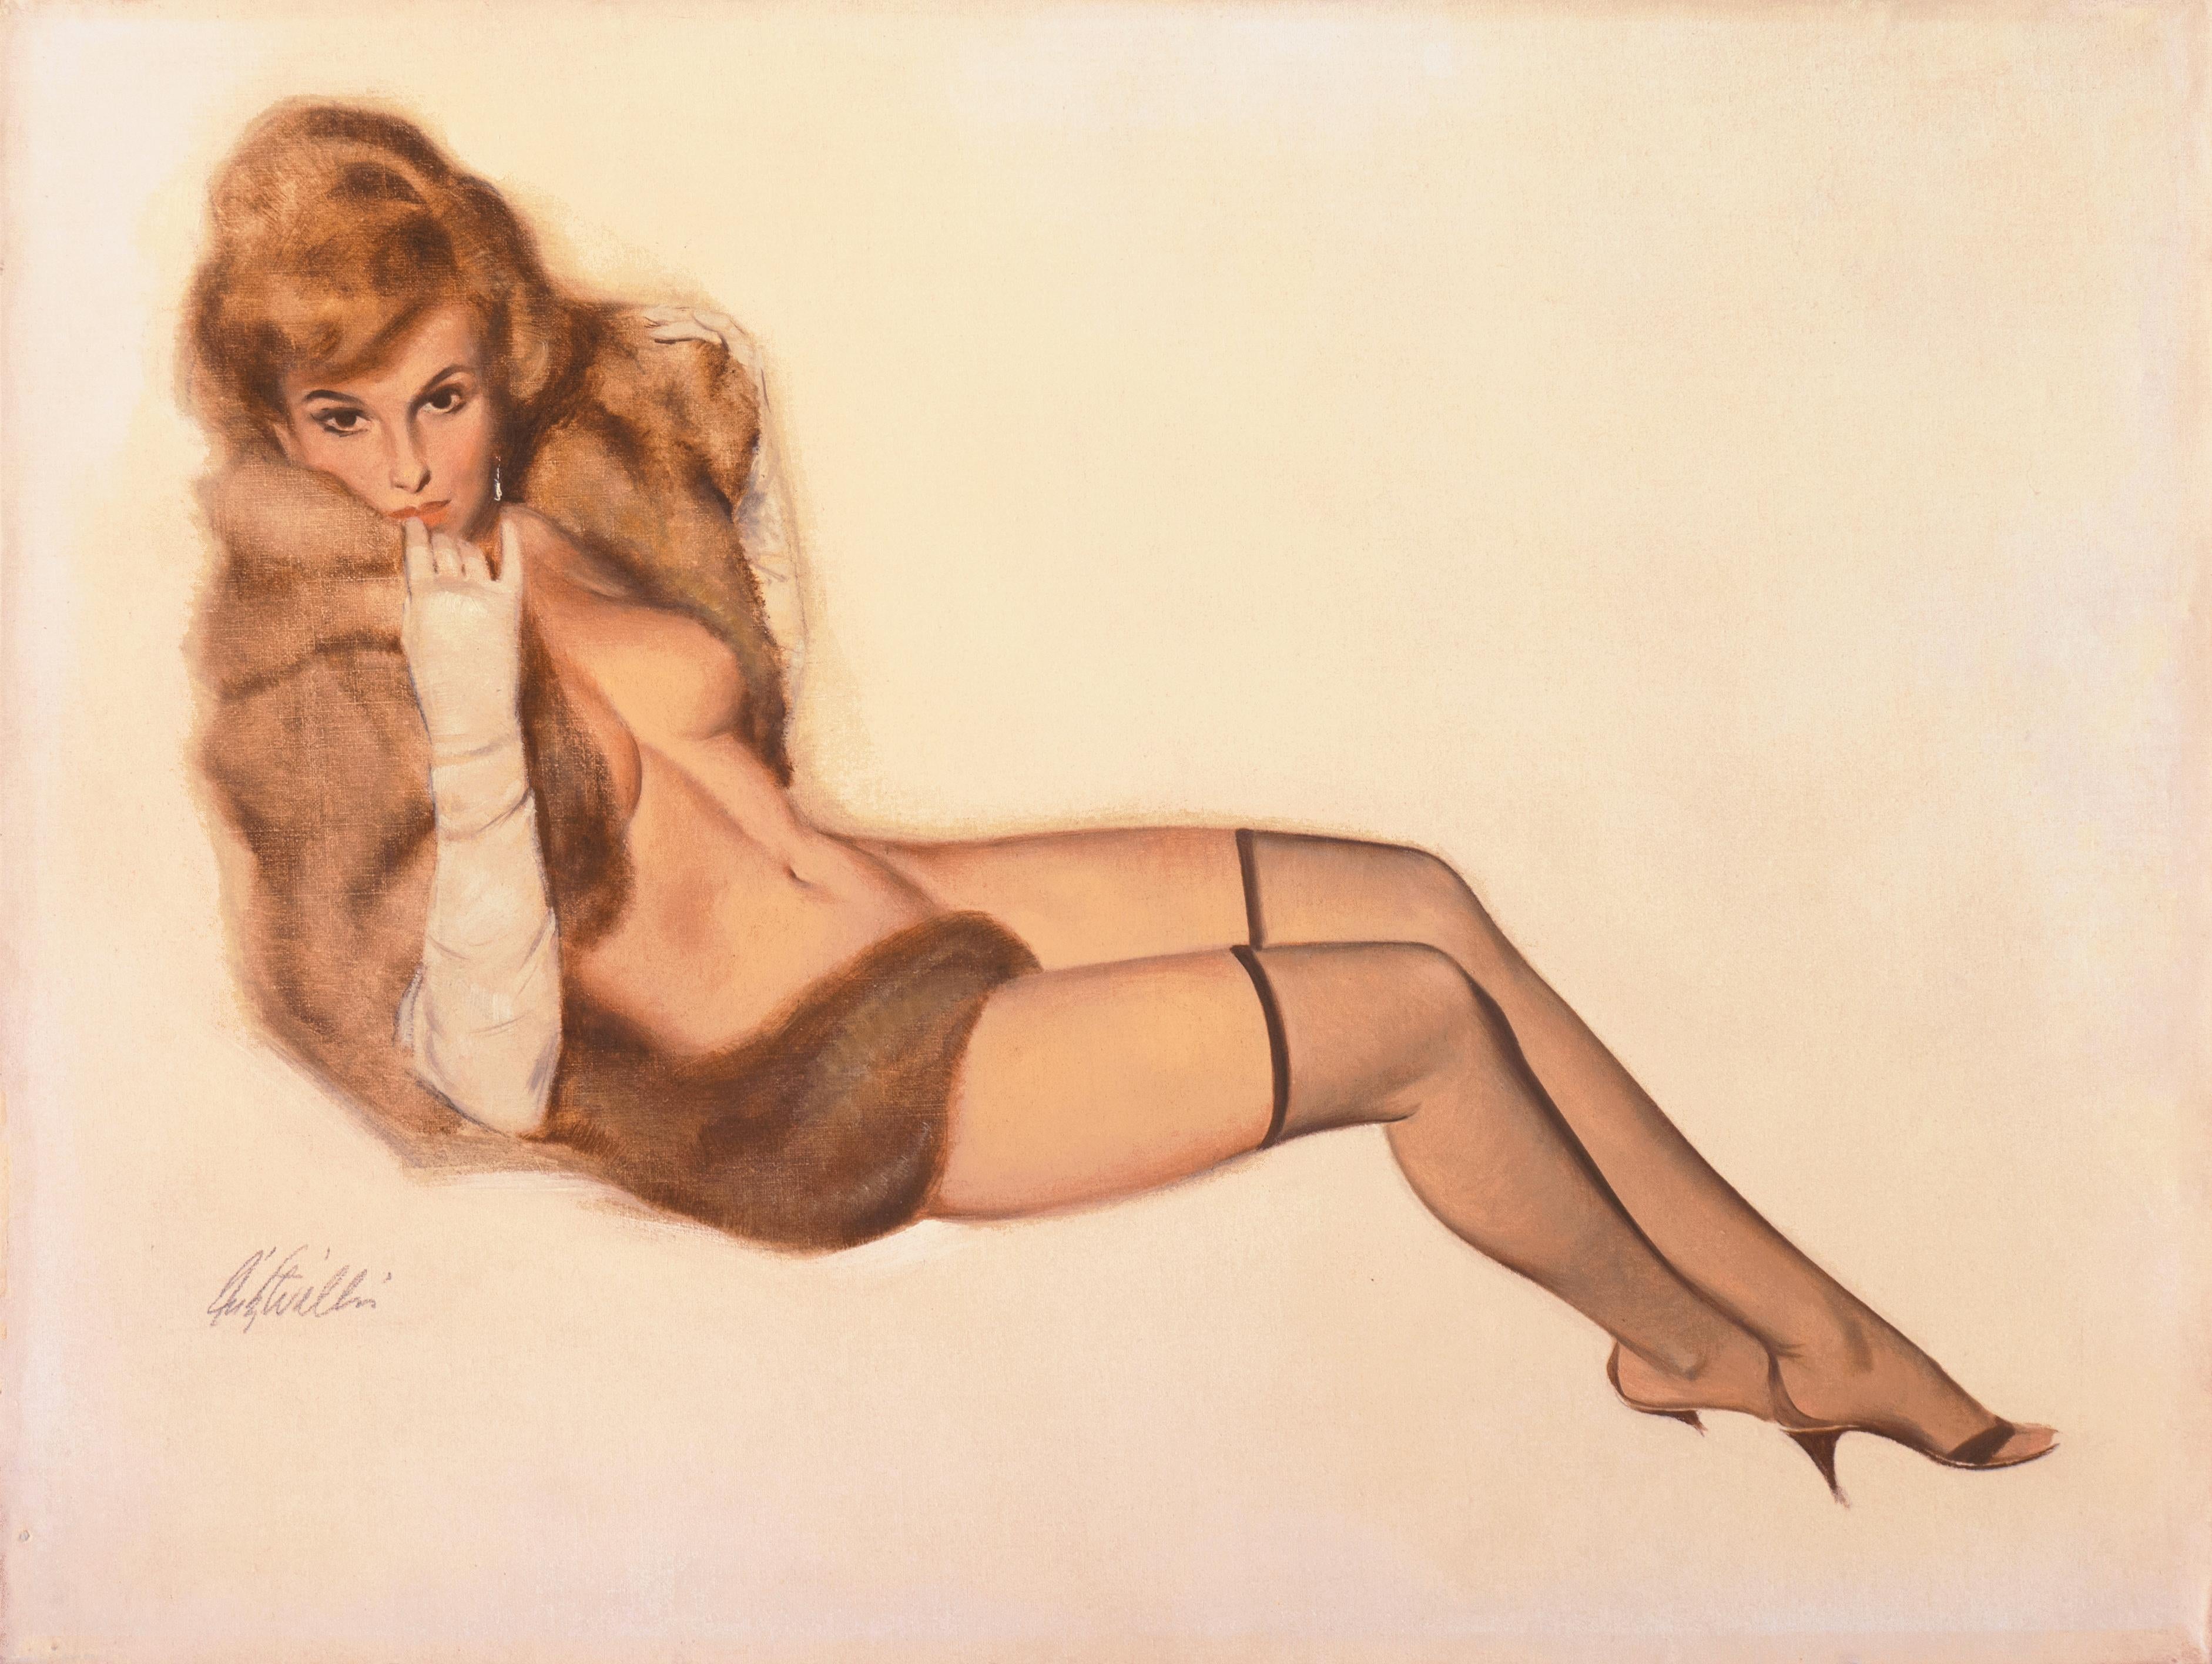 'Venus in Furs', American Pin-Up Illustration, Nude, Leopold von Sacher-Masoch - Painting by Fritz Willis